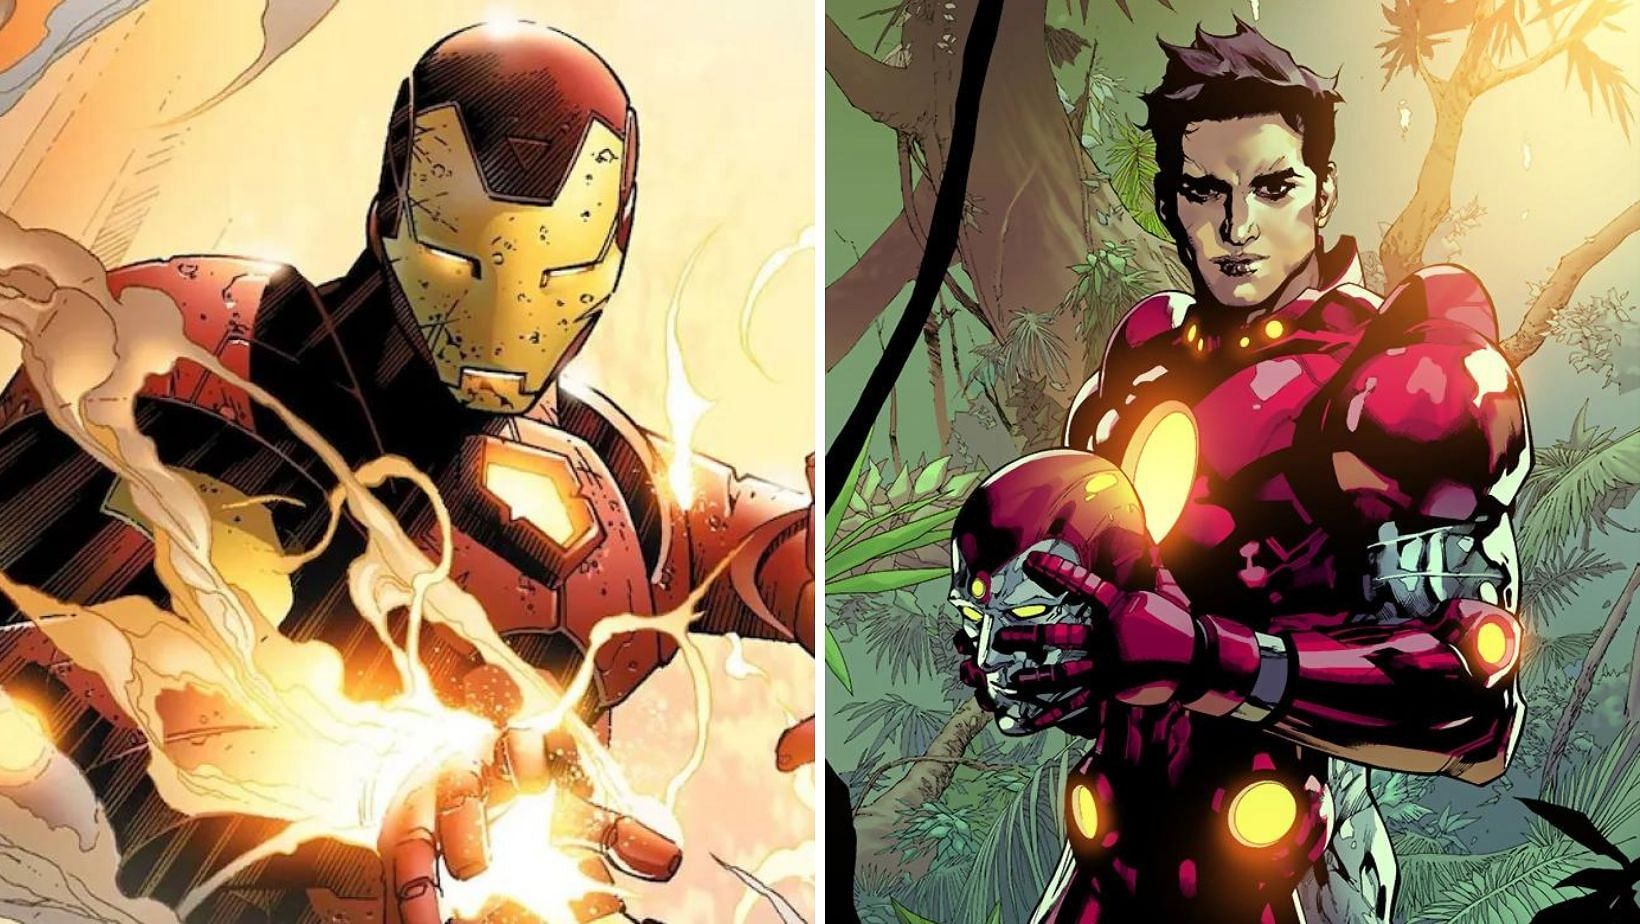 Two armored giants go head-to-head in an epic battle for the ages: Iron Lad vs Iron Man! (Image via Sportskeeda)